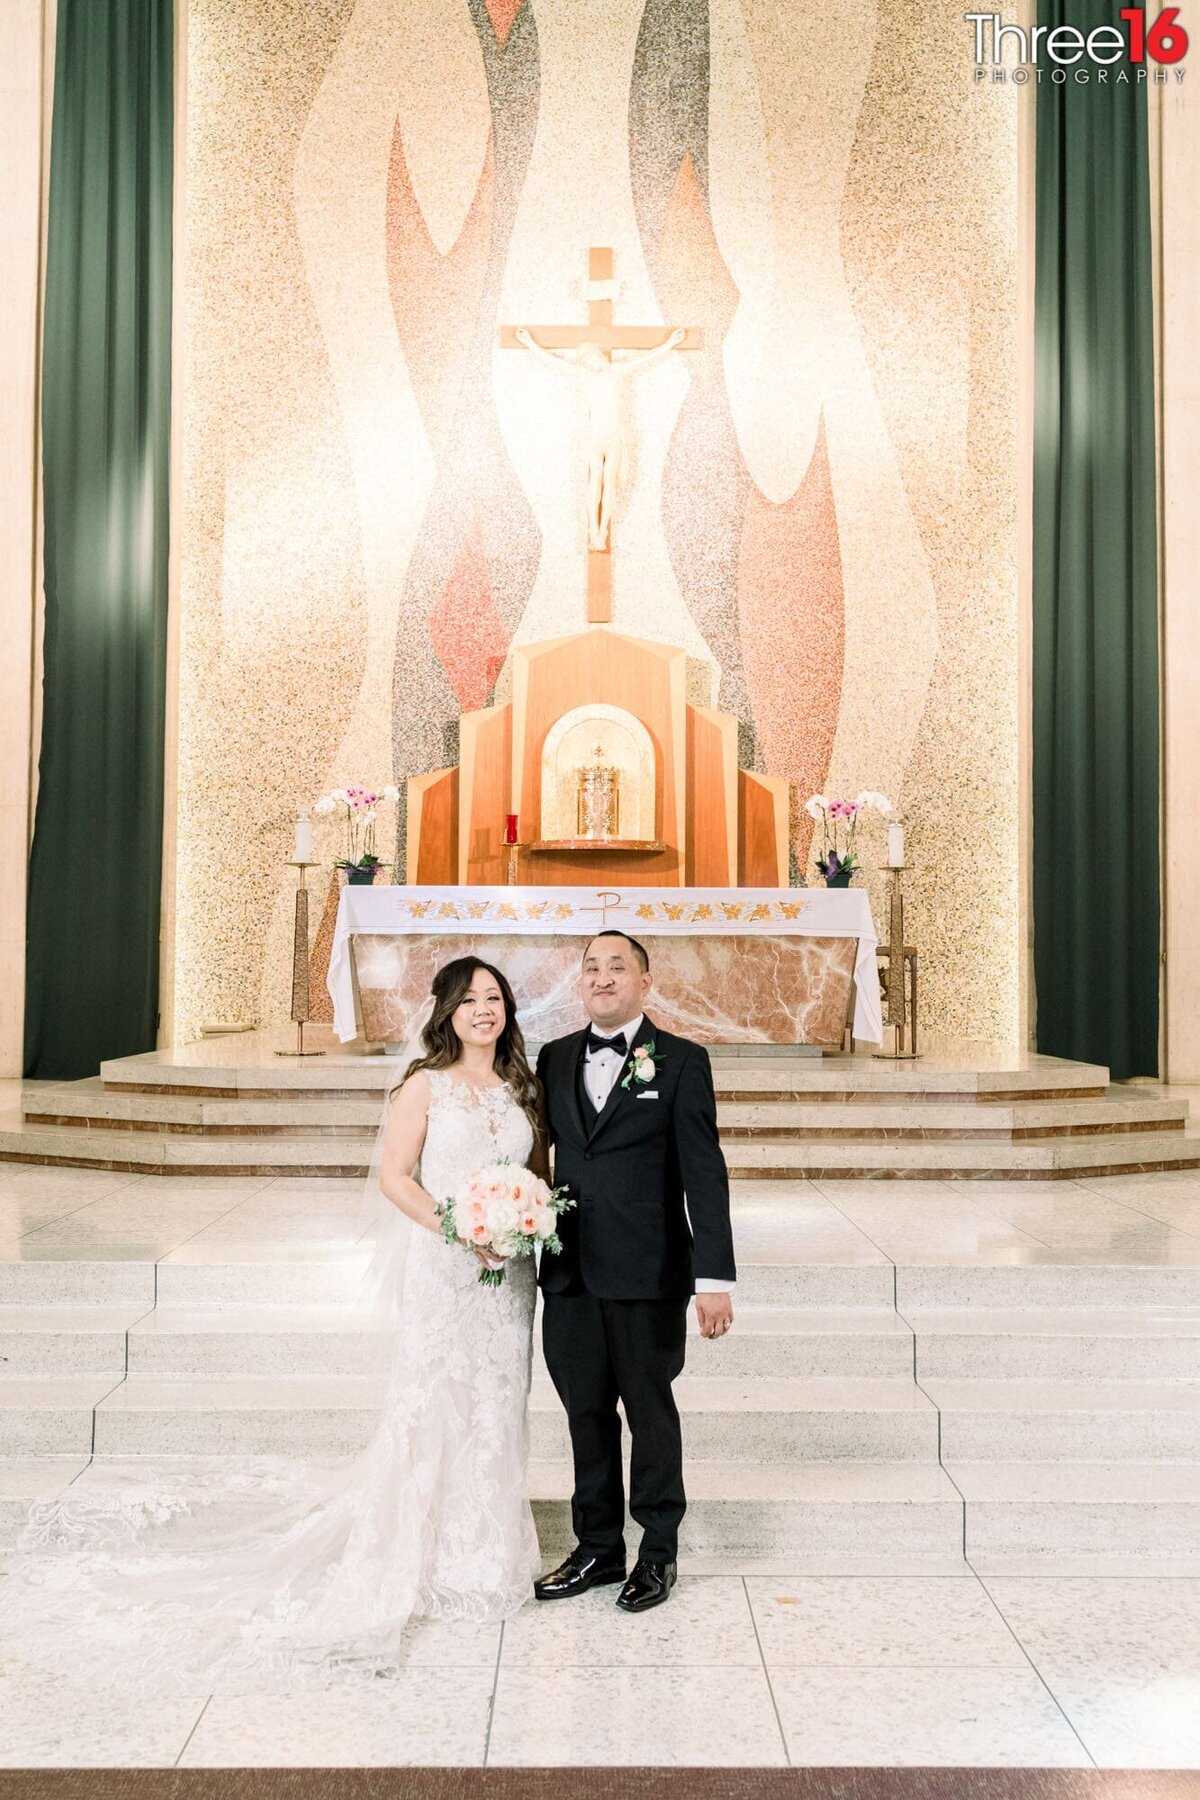 Newly married couple pose in front of the altar in a Catholic church